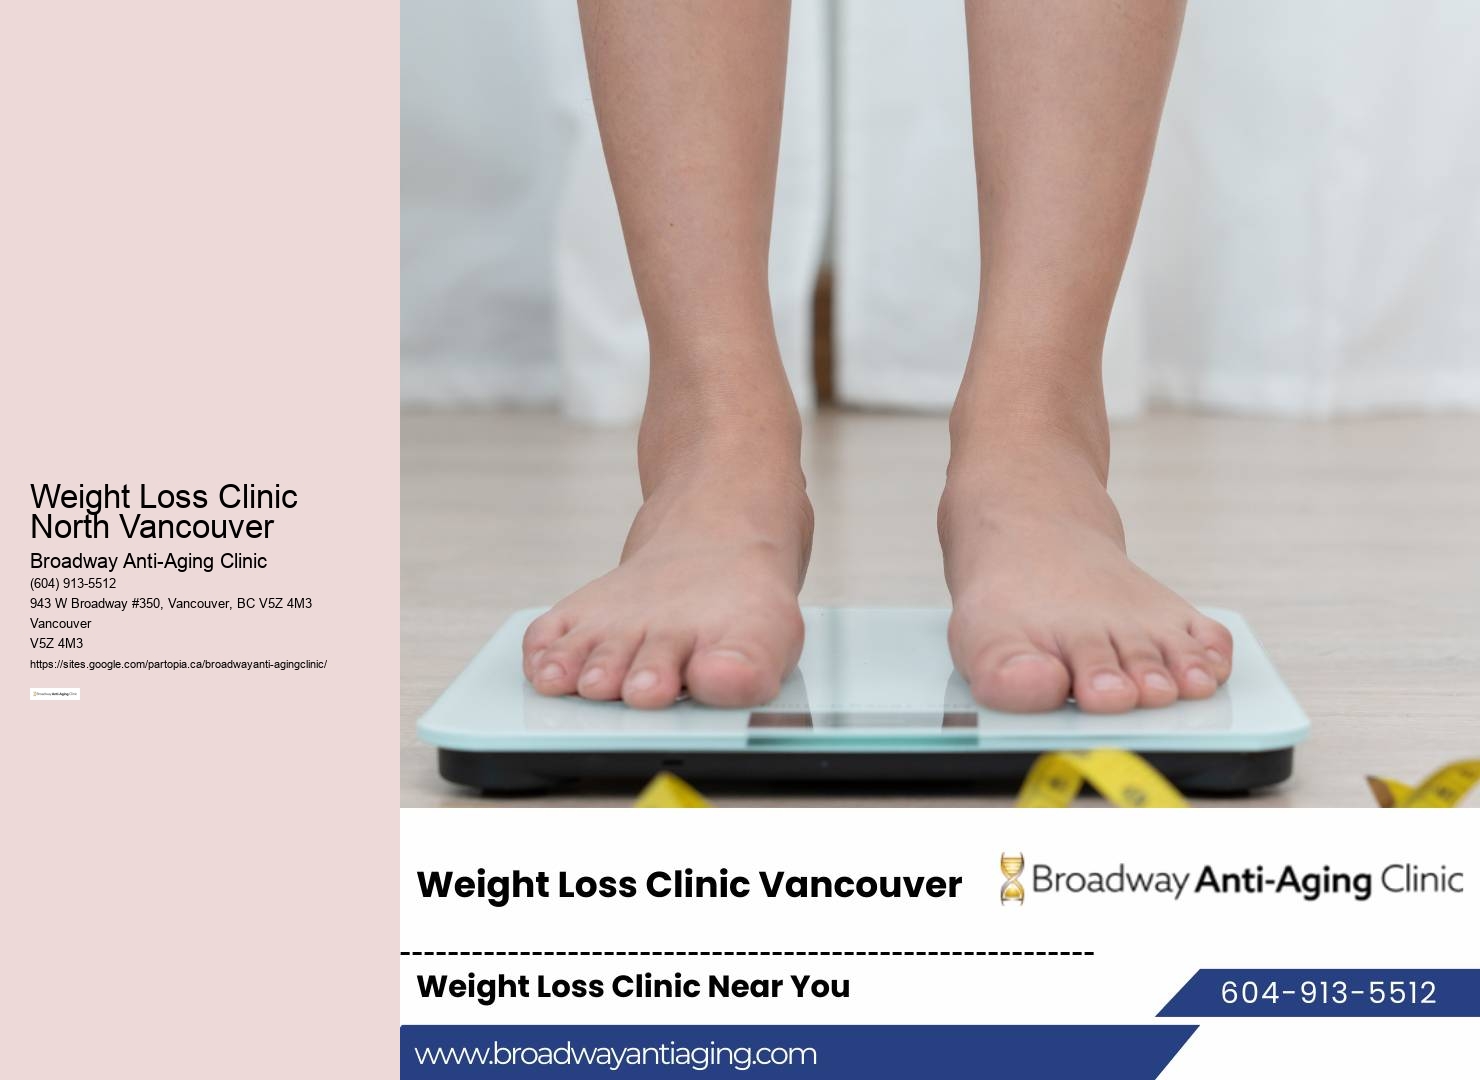 Vancouver Weight Loss Group Programs